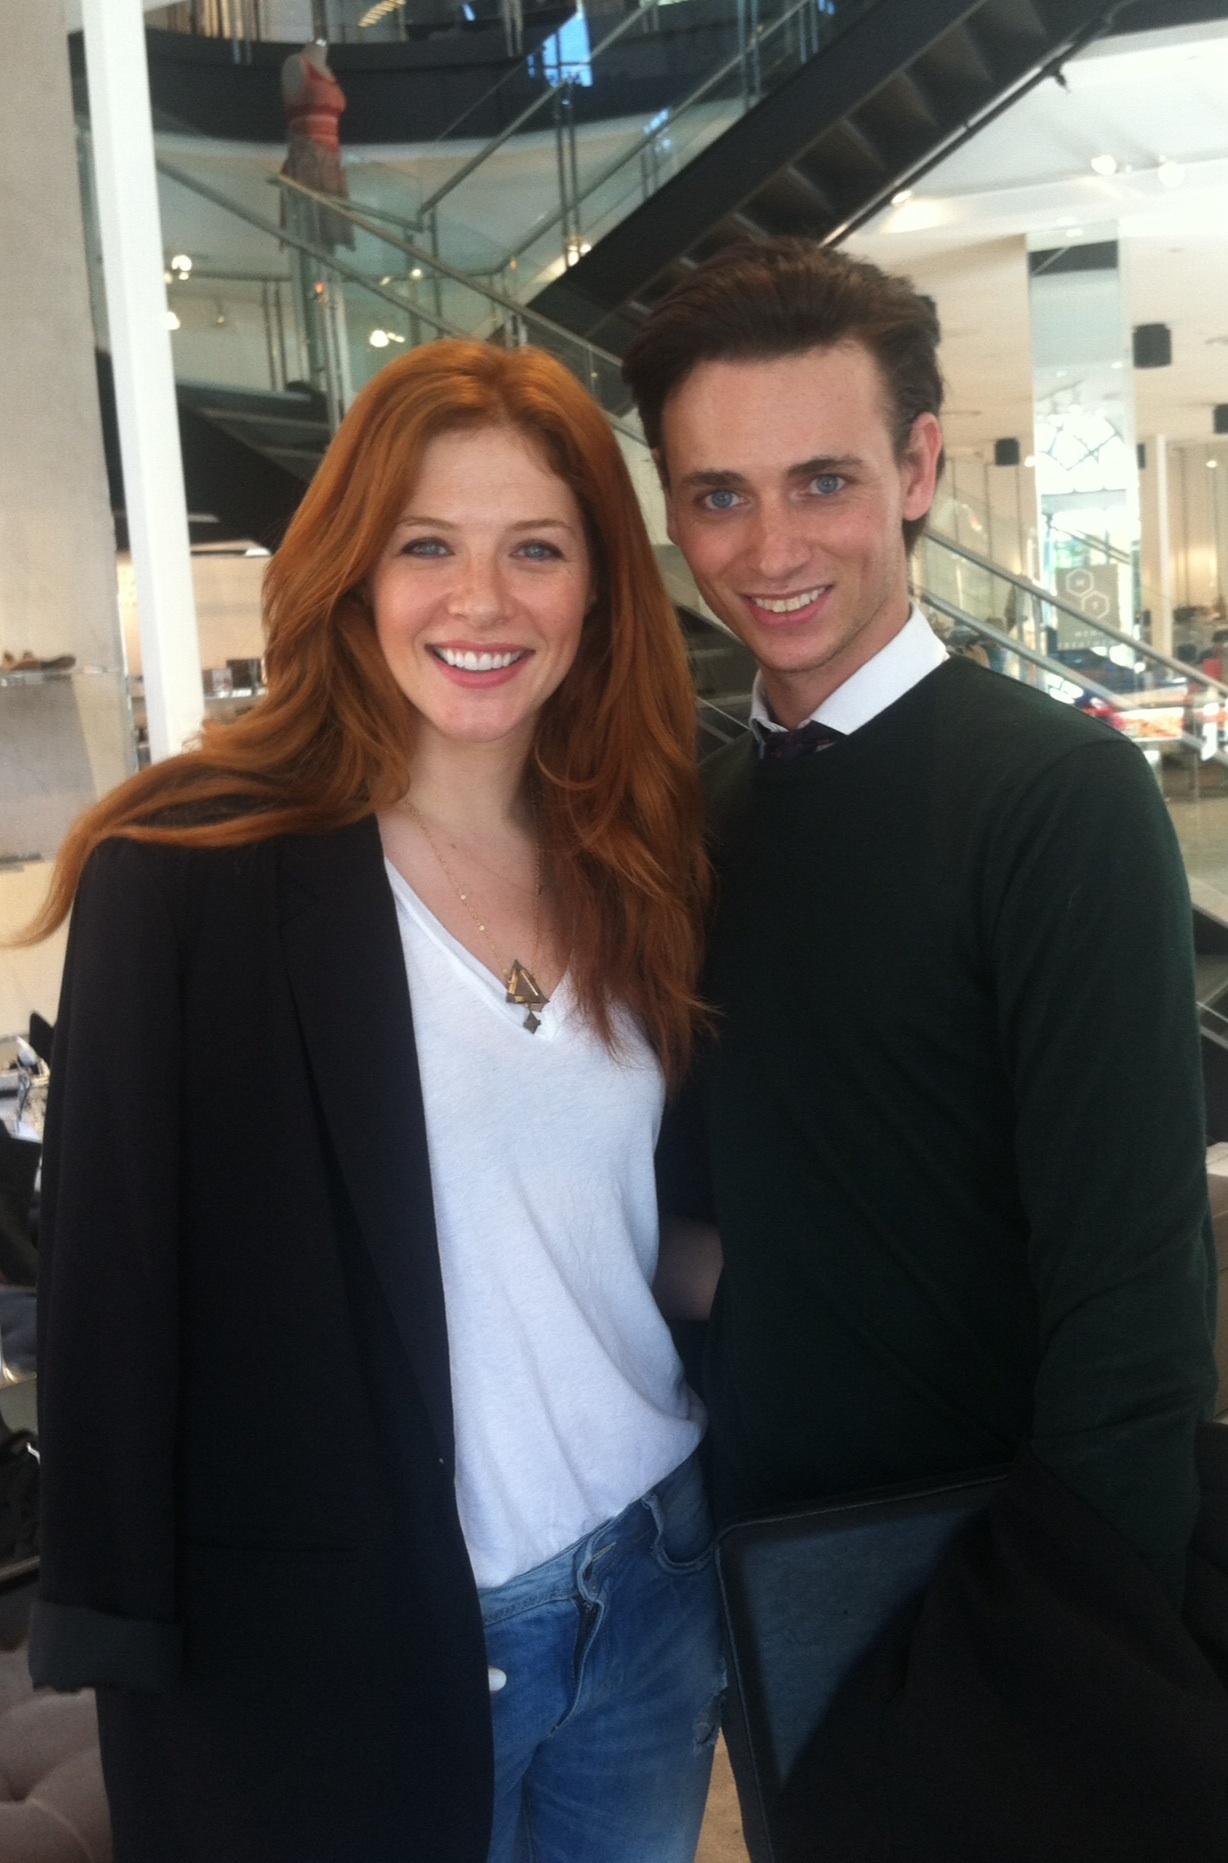 Actor Alexander Rain (G.B.F.) and actress Rachelle Lefevre (Twilight, The Dome) at Barny's New York in Beverly Hills July 21, 2014